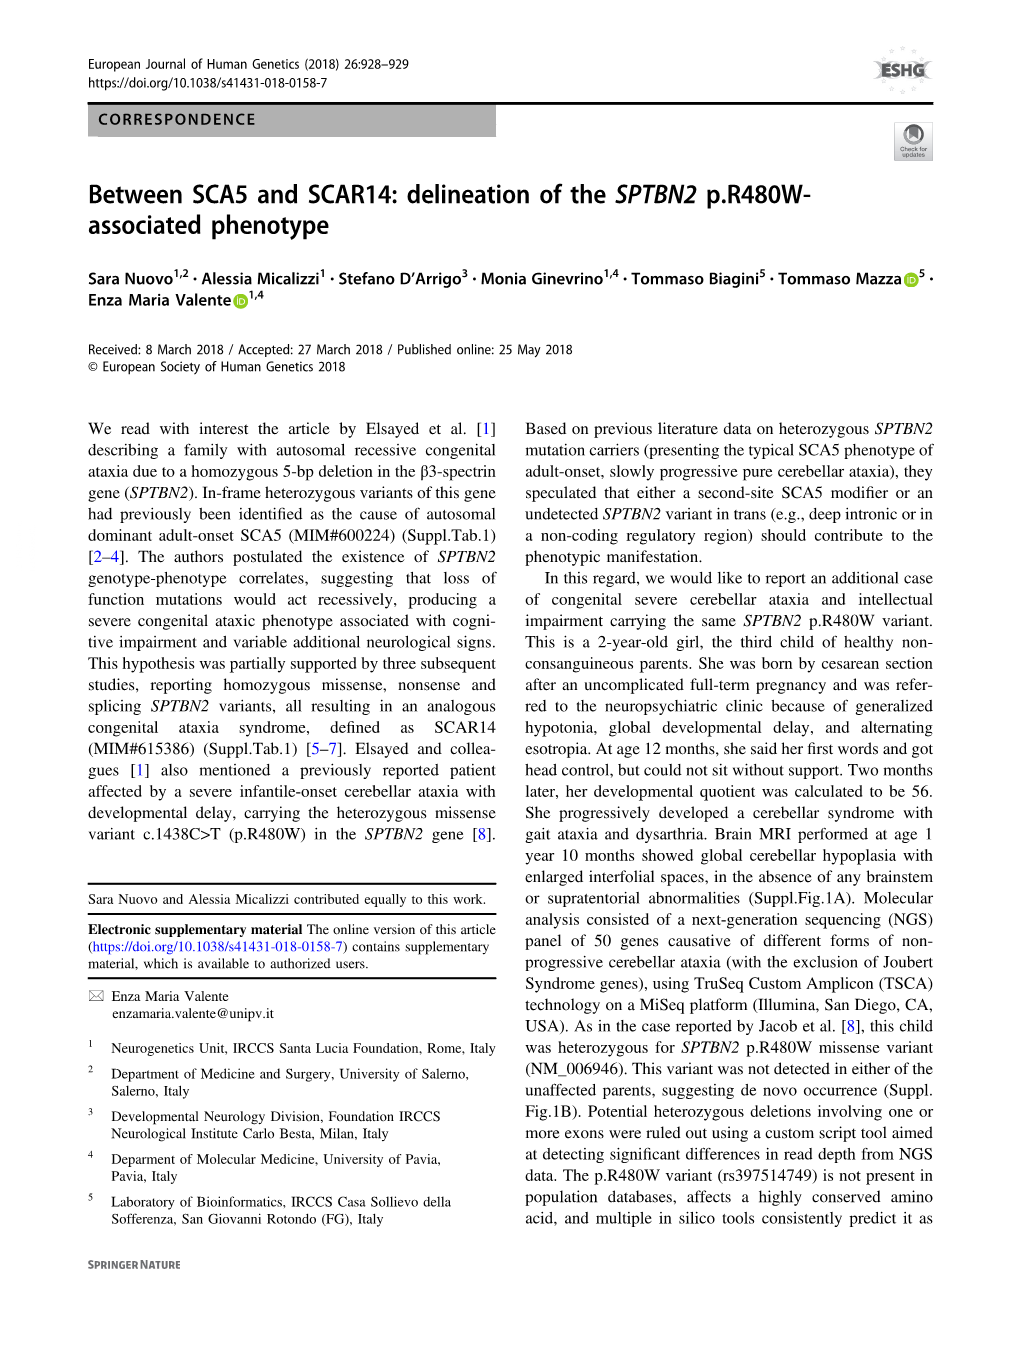 Between SCA5 and SCAR14: Delineation of the SPTBN2 P.R480W- Associated Phenotype